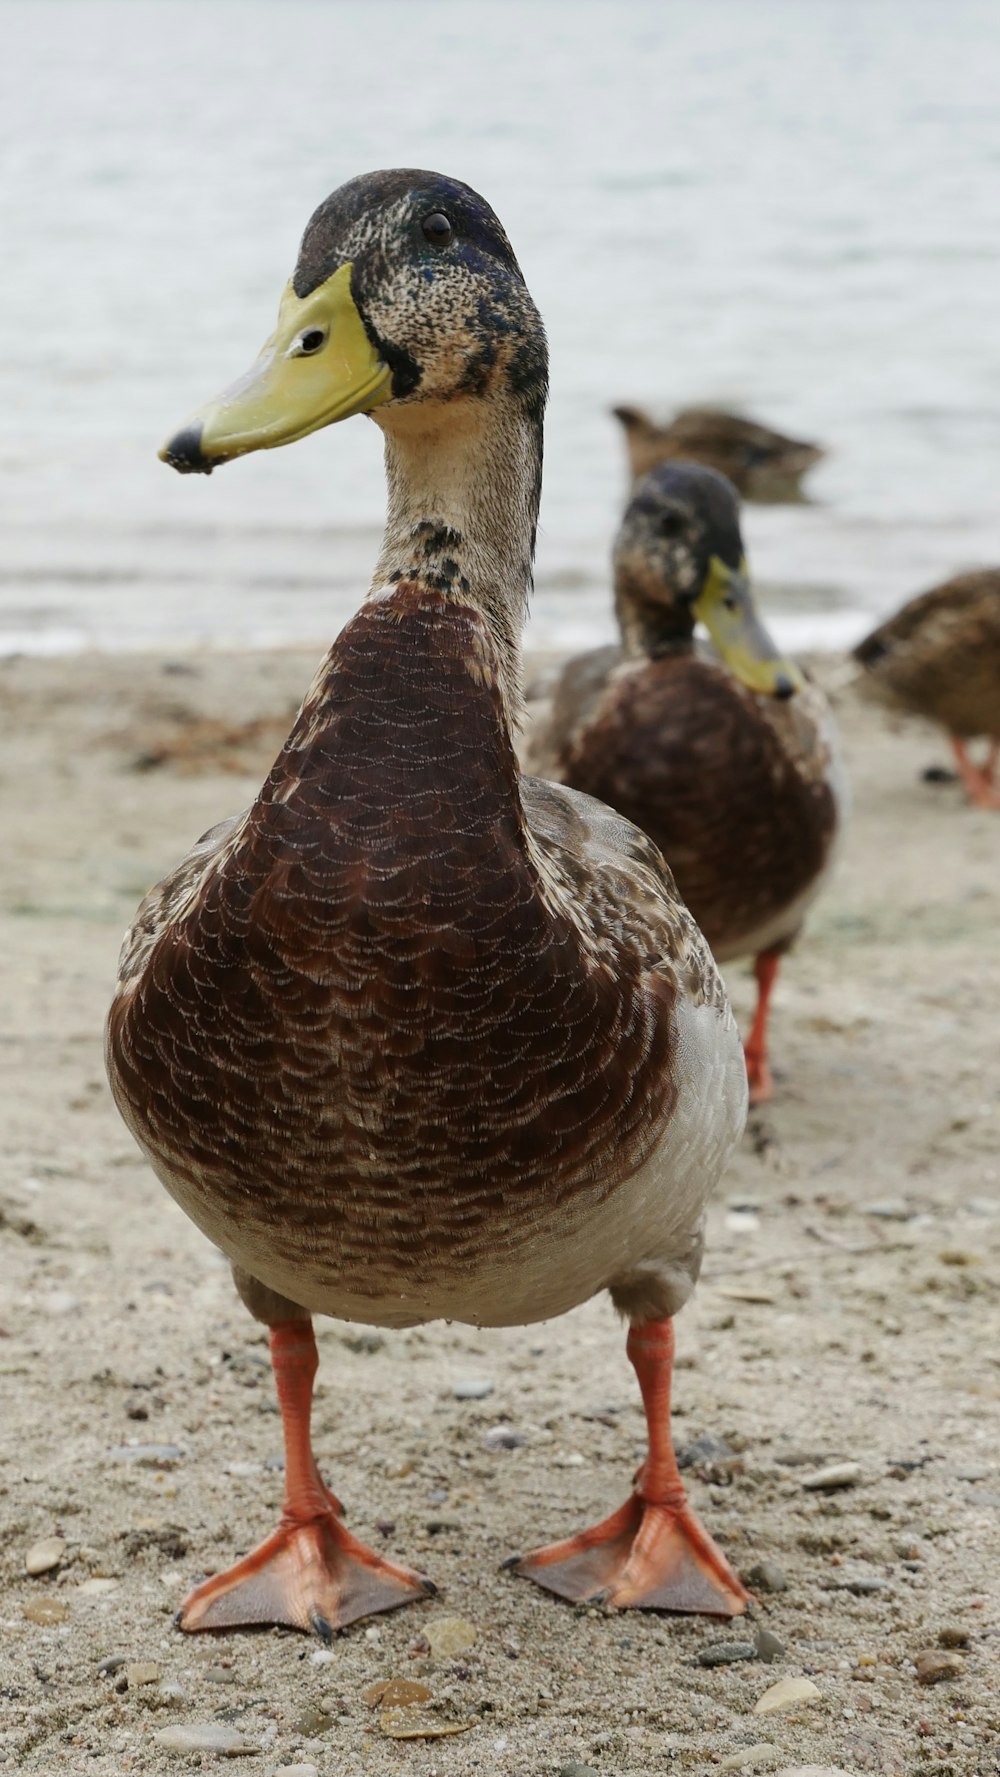 a close up of a duck on a beach near the water